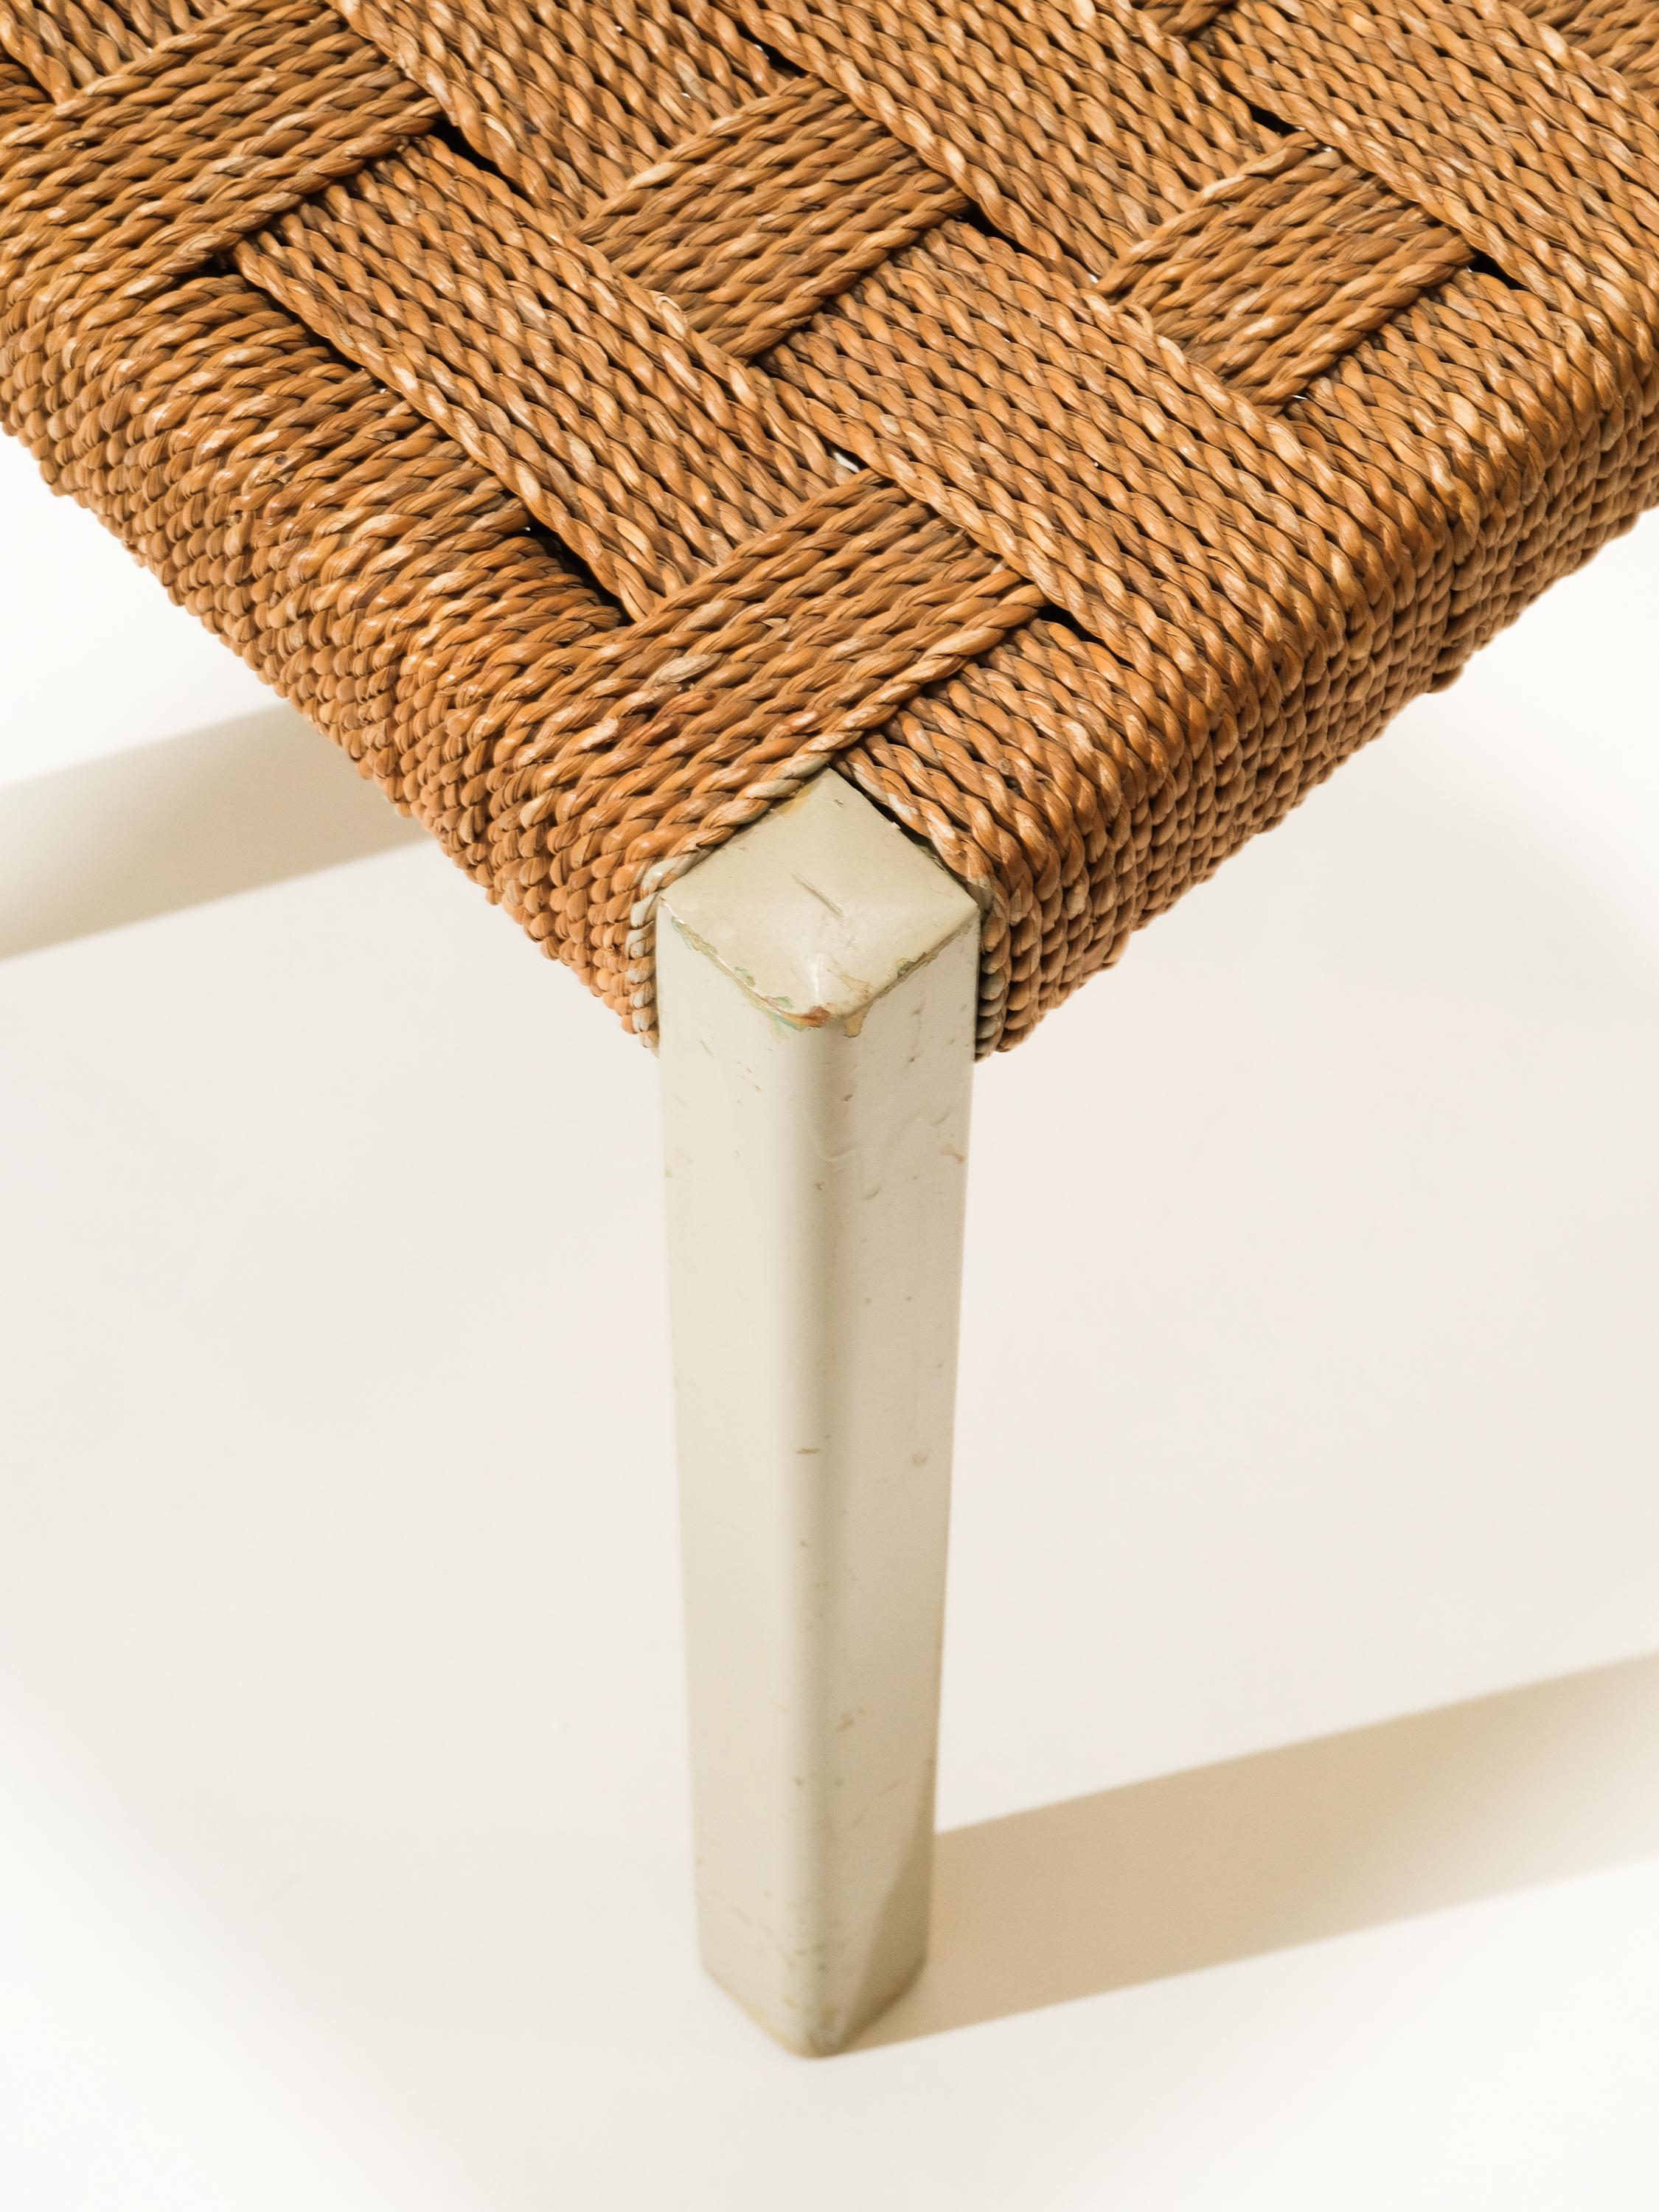 Woven Seagrass and Painted Wood Stool by Axel Larsson for Gemla, Sweden, 1940s In Good Condition For Sale In Helsinki, FI